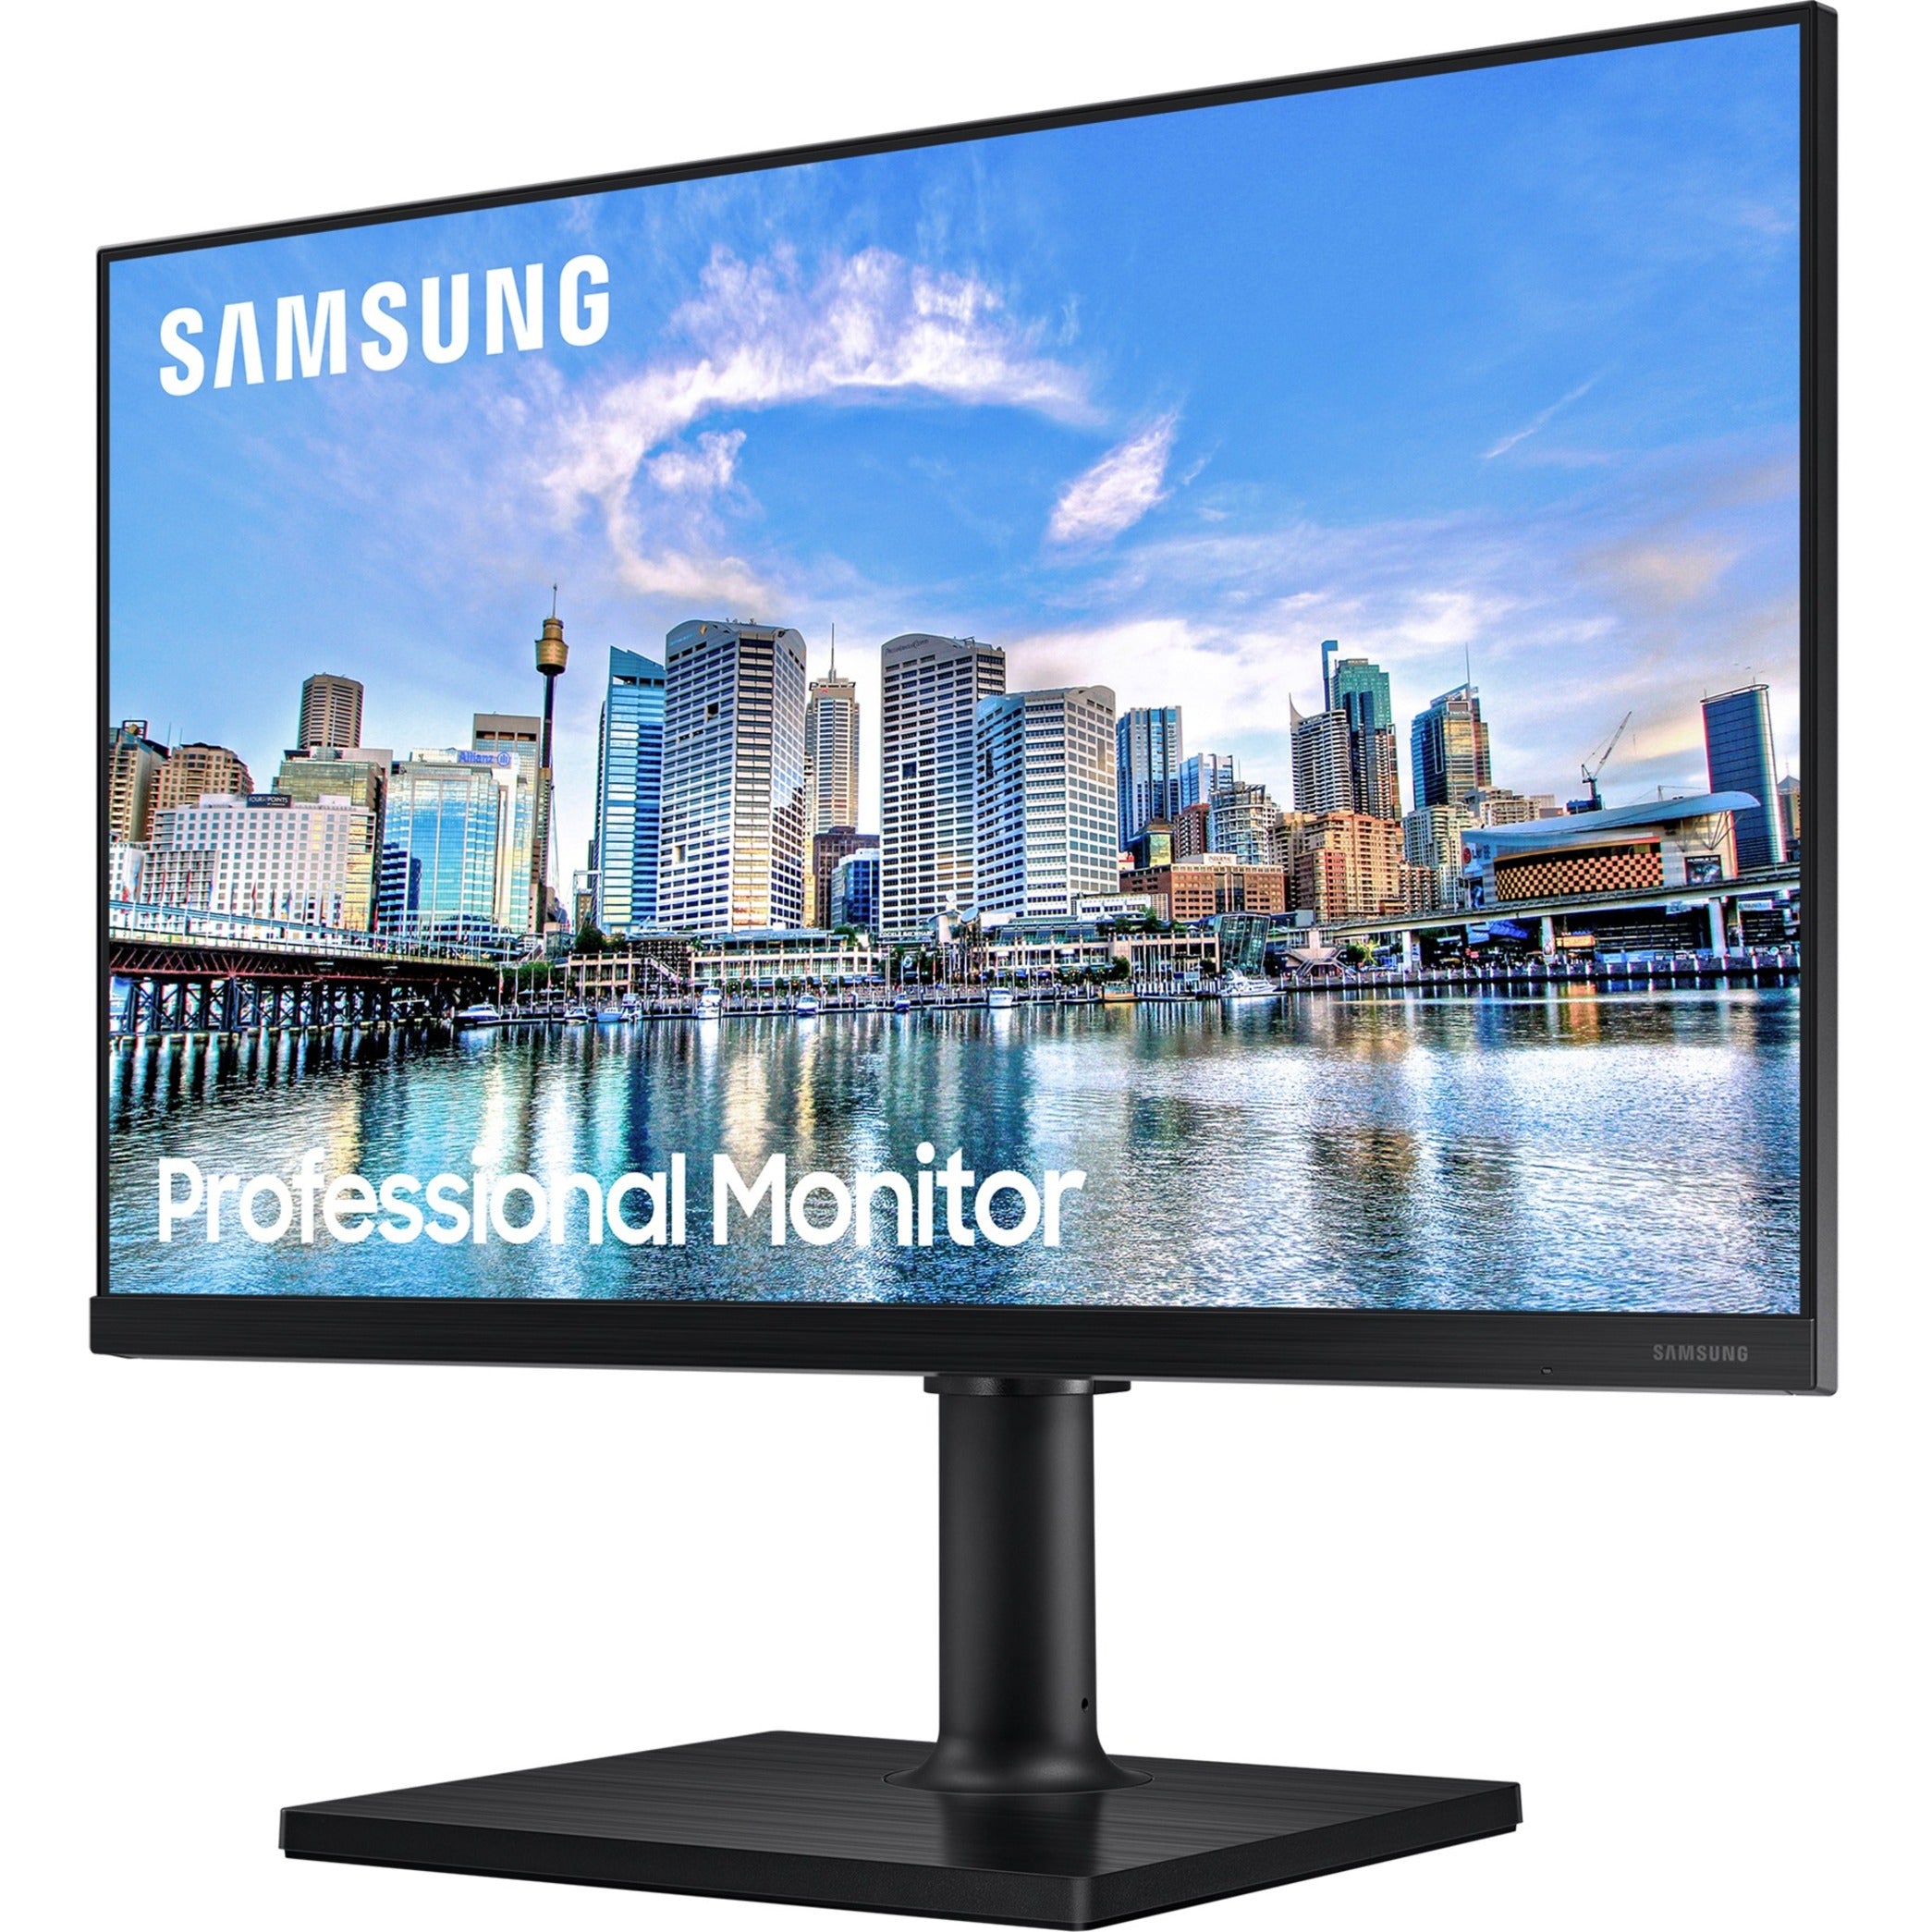 Samsung F22T454FQN 22 Business Monitor with IPS Panel, Full HD, FreeSync, 75Hz Refresh Rate, 178° Viewing Angle, Black